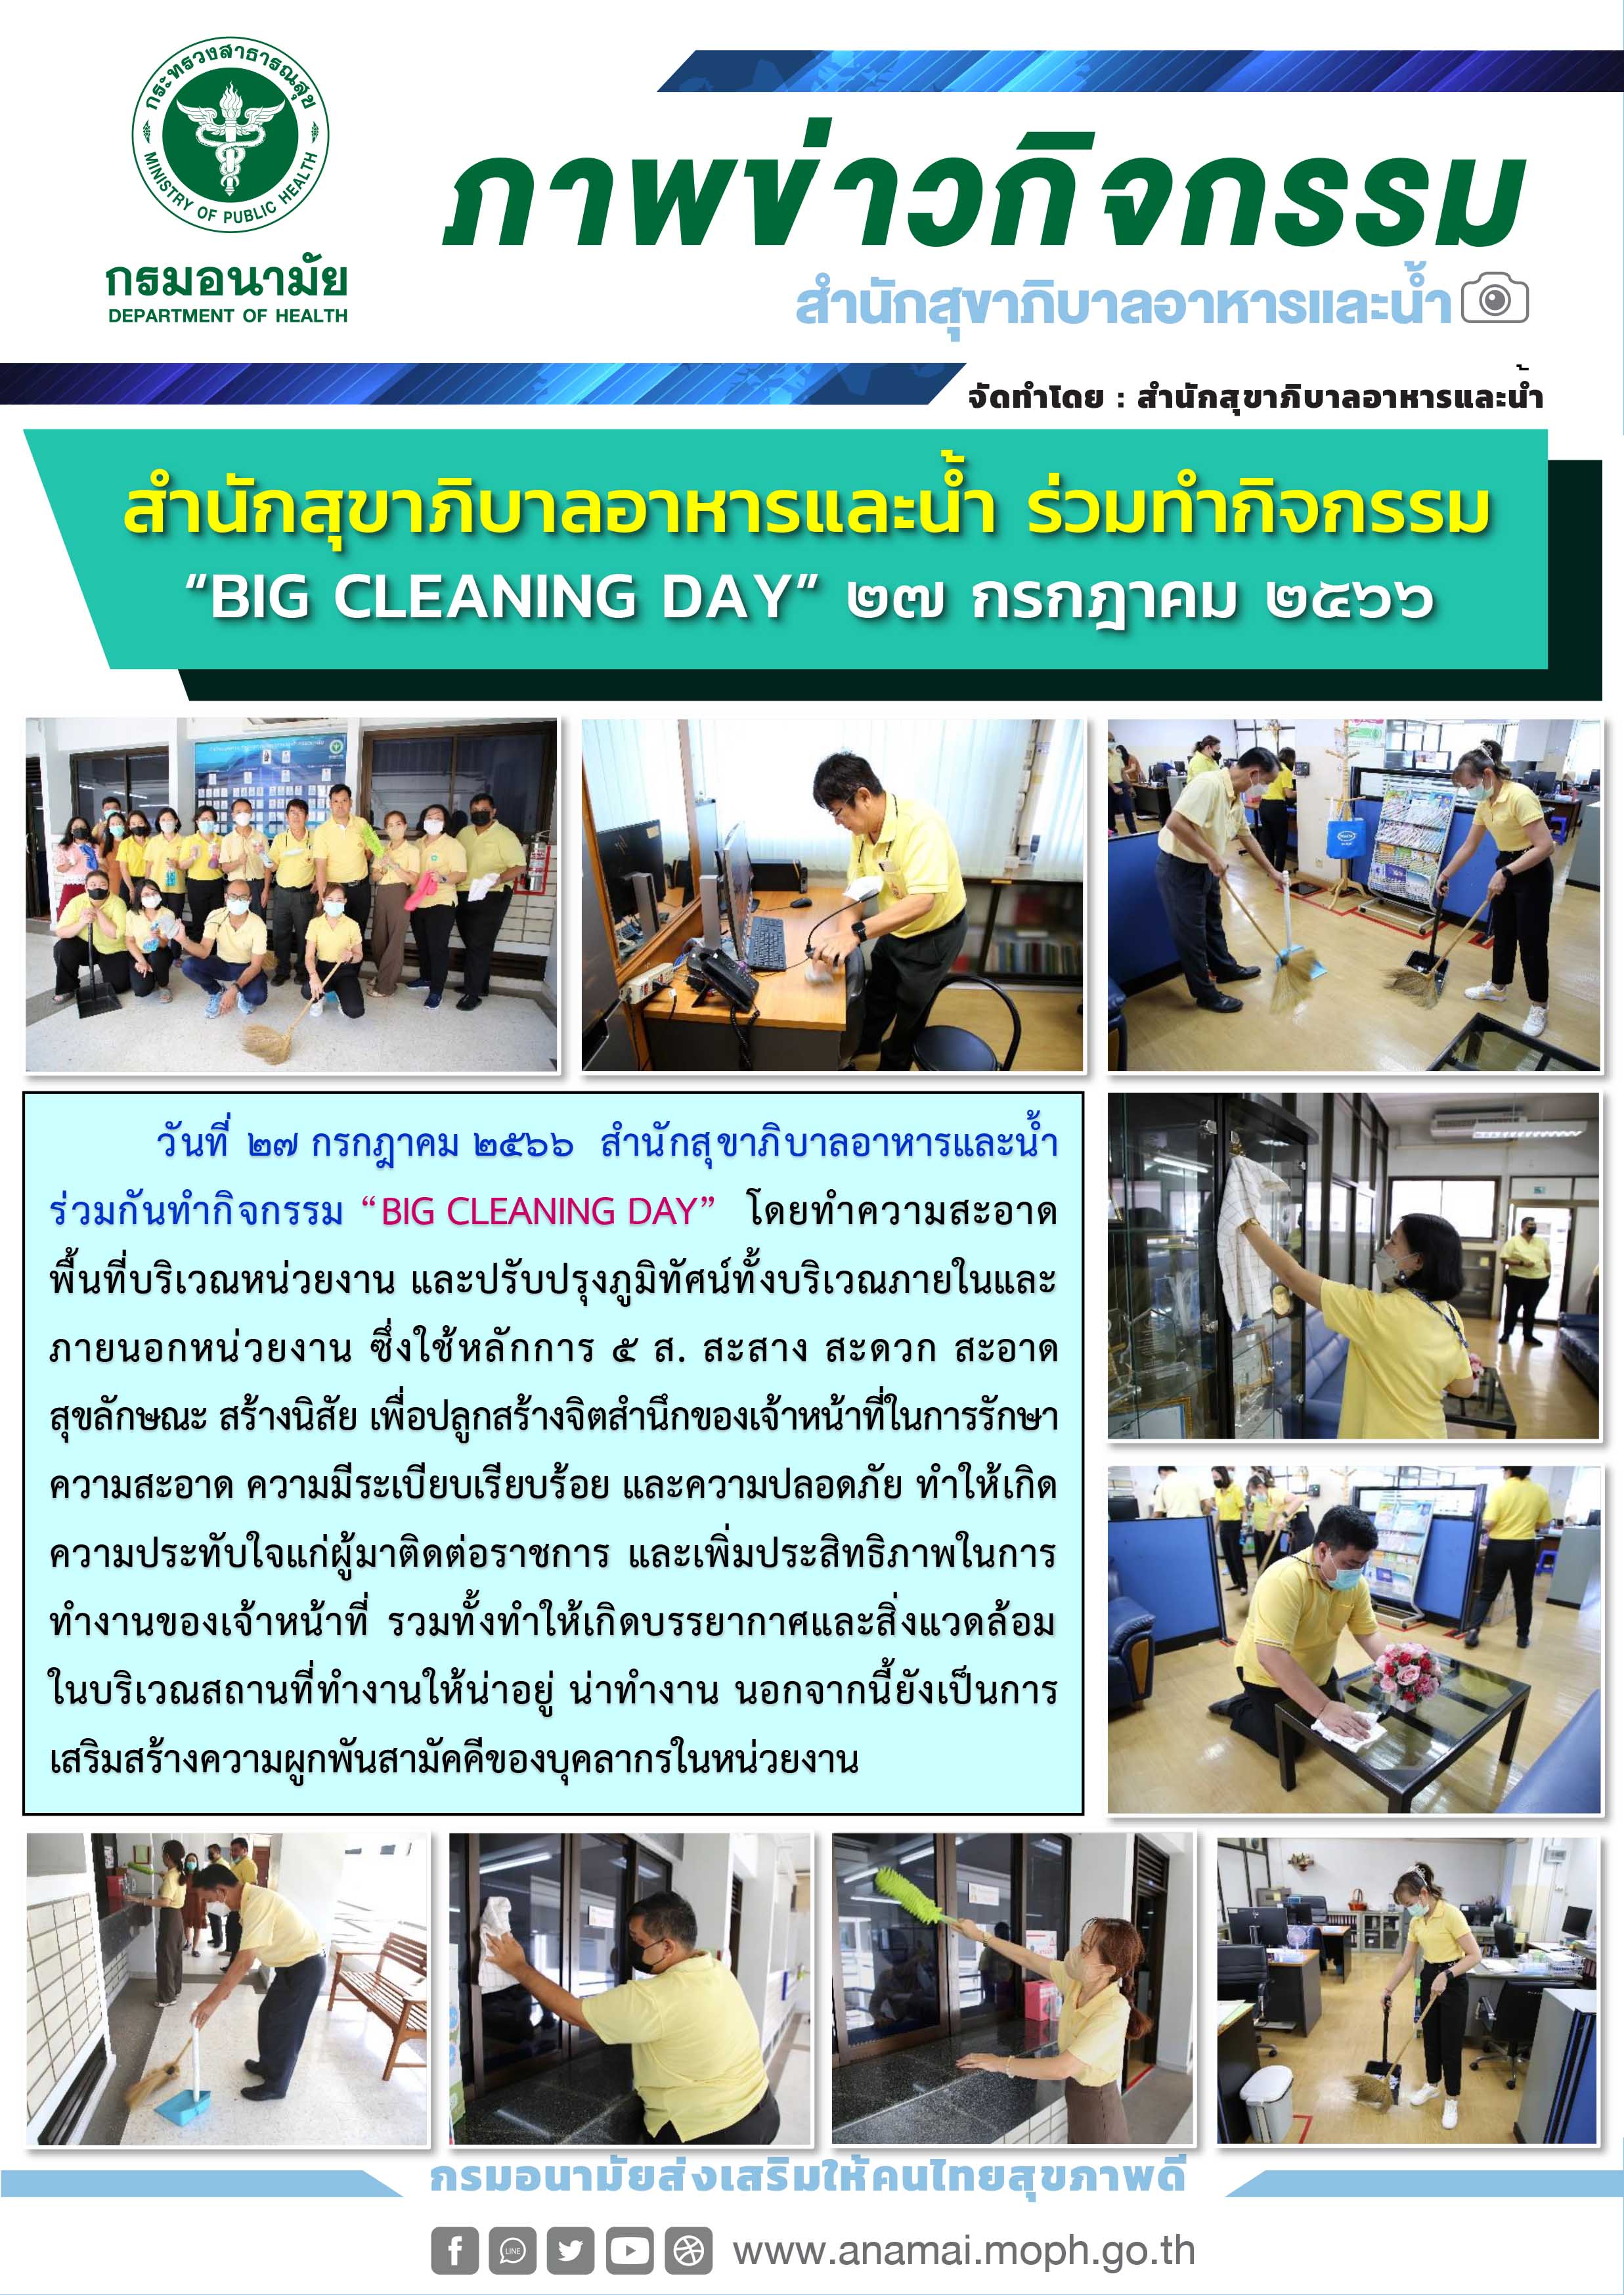 270766_Big cleaning